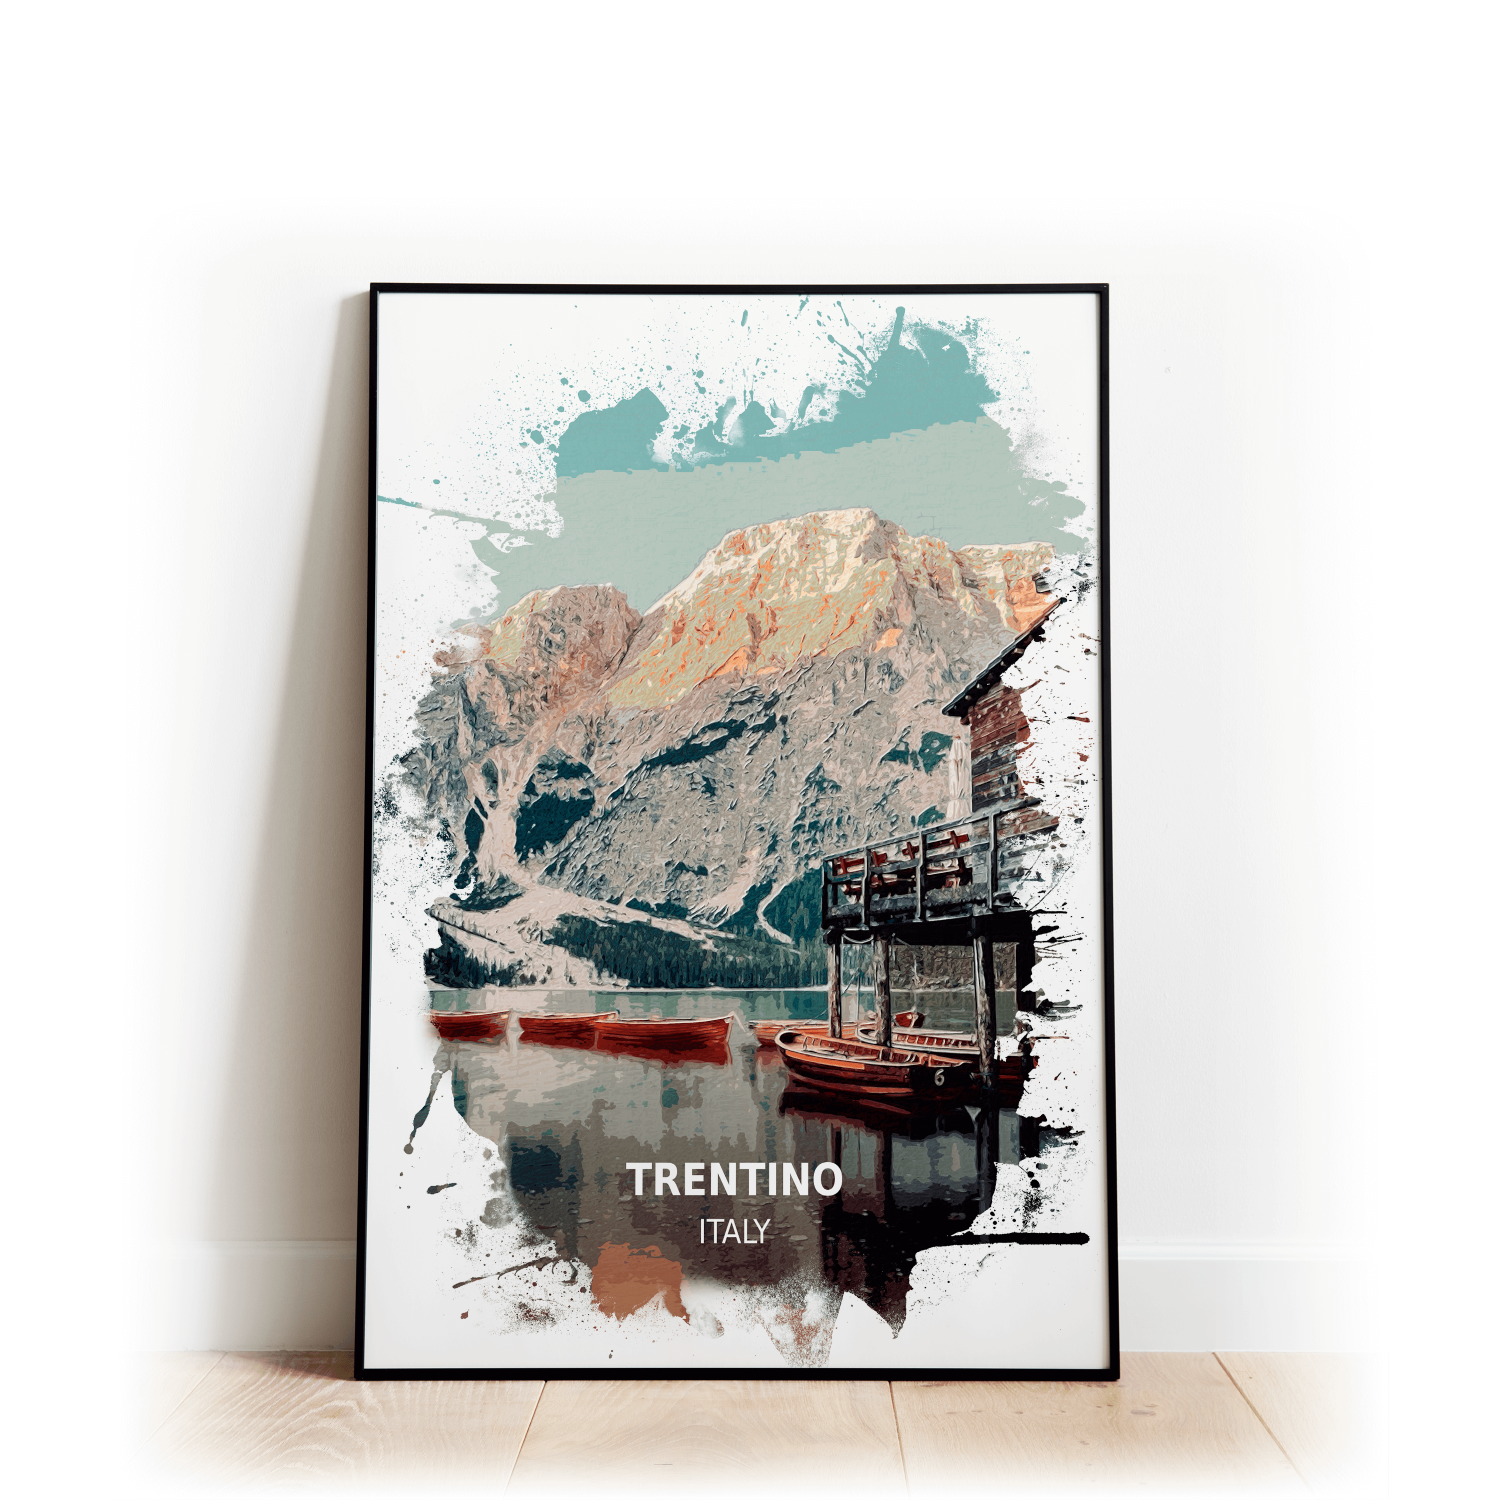 Trentino - Italy - Print - A4 - Standard - Print Only